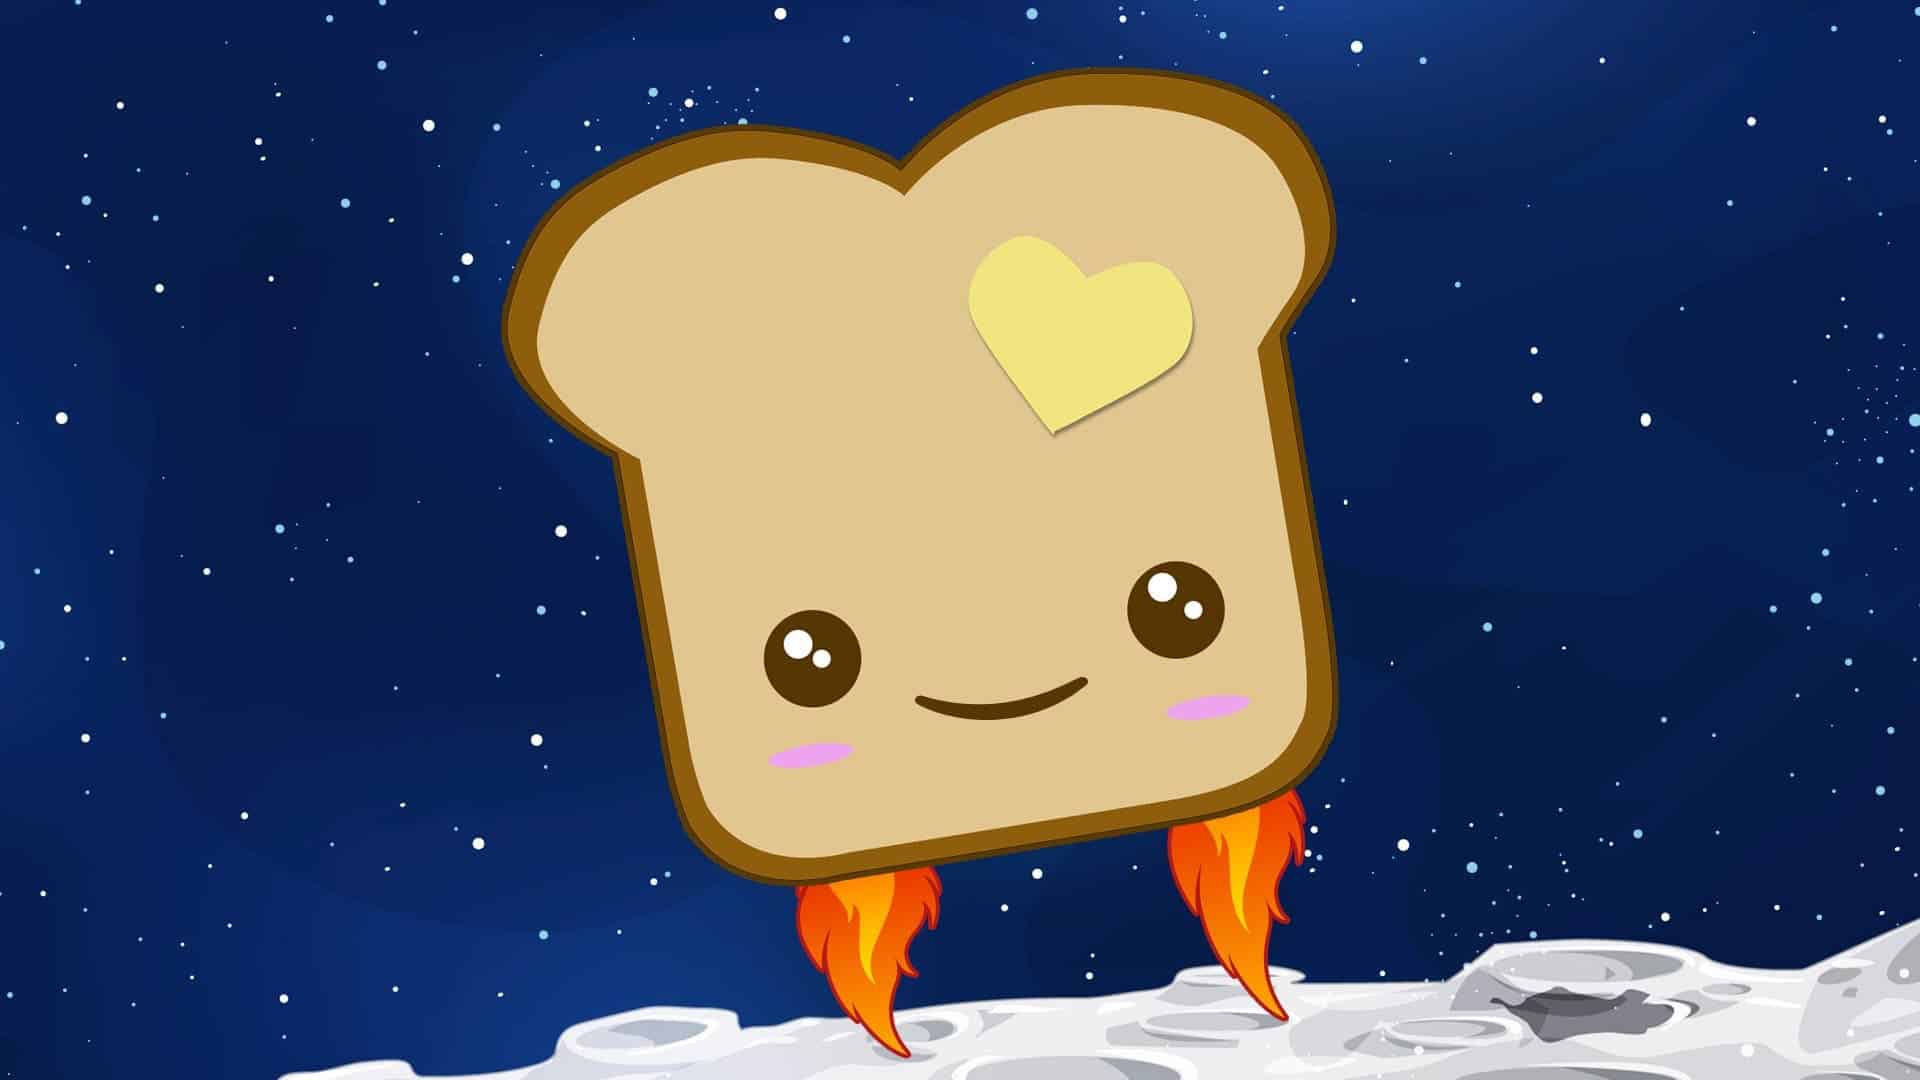 Credit: YouTube, Space Bread.